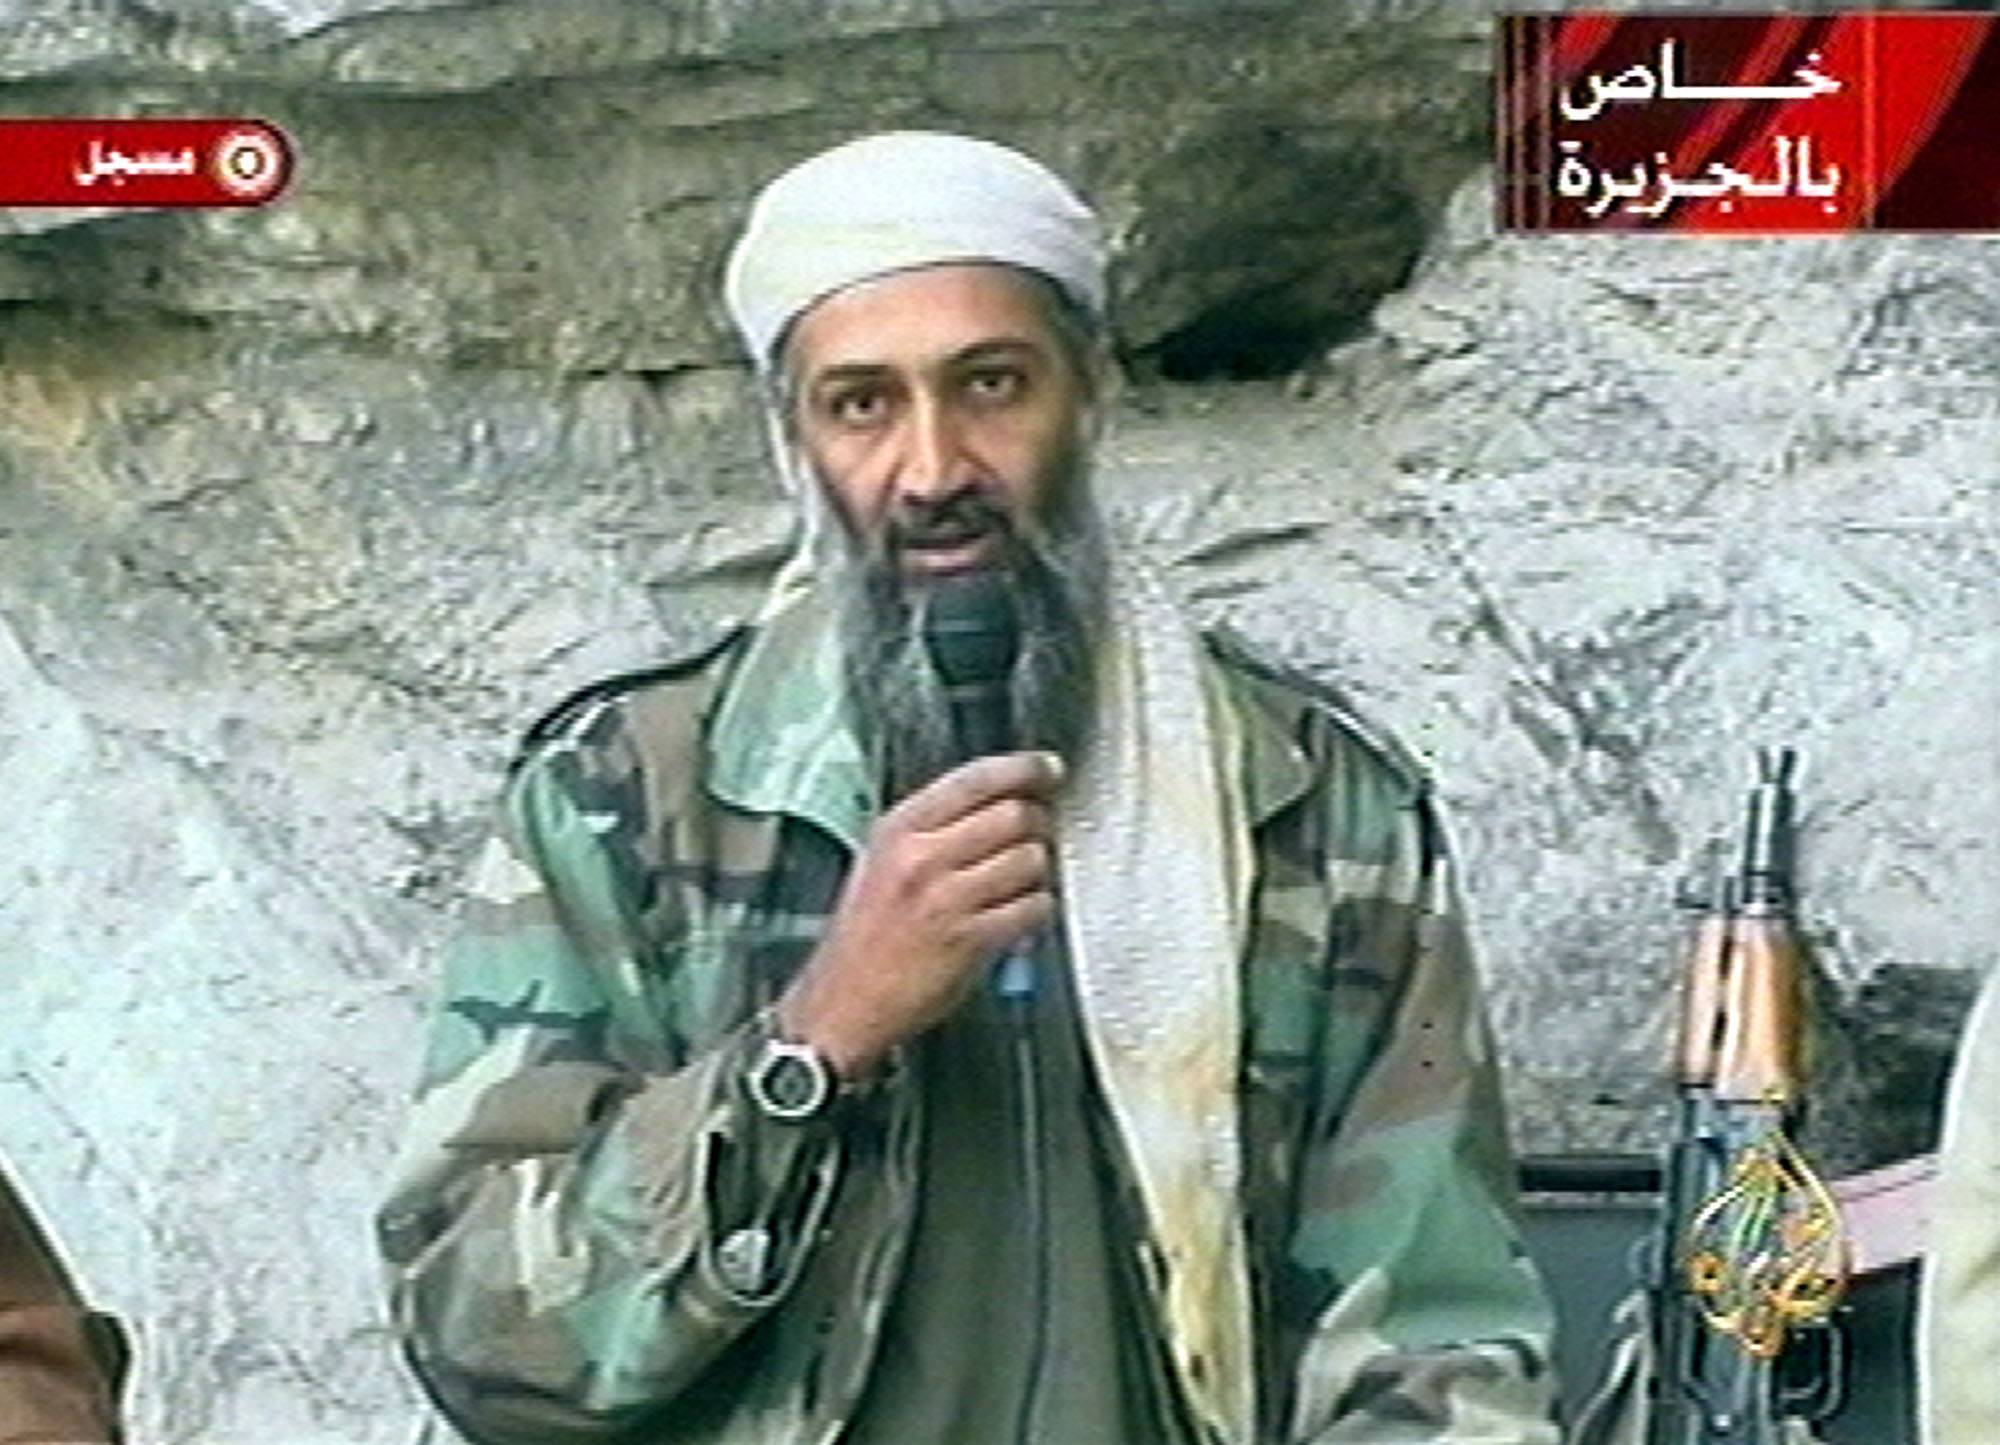 Osama Bin Laden Killed - Osama bin Laden, the mastermind behind the Sept. 11, 2001, terrorist attacks was killed by U.S. On Sunday evening, the administration announced that 9/11 mastermind terrorist Osama bin Laden was killed in Pakistan by American forces in Pakistan. Americans across the country celebrated the death as security at U.S. embassies and public places in the U.S. was ramped up in preparation for possible retaliation attacks.(Photo: AP Photo/Al Jazeera, File)